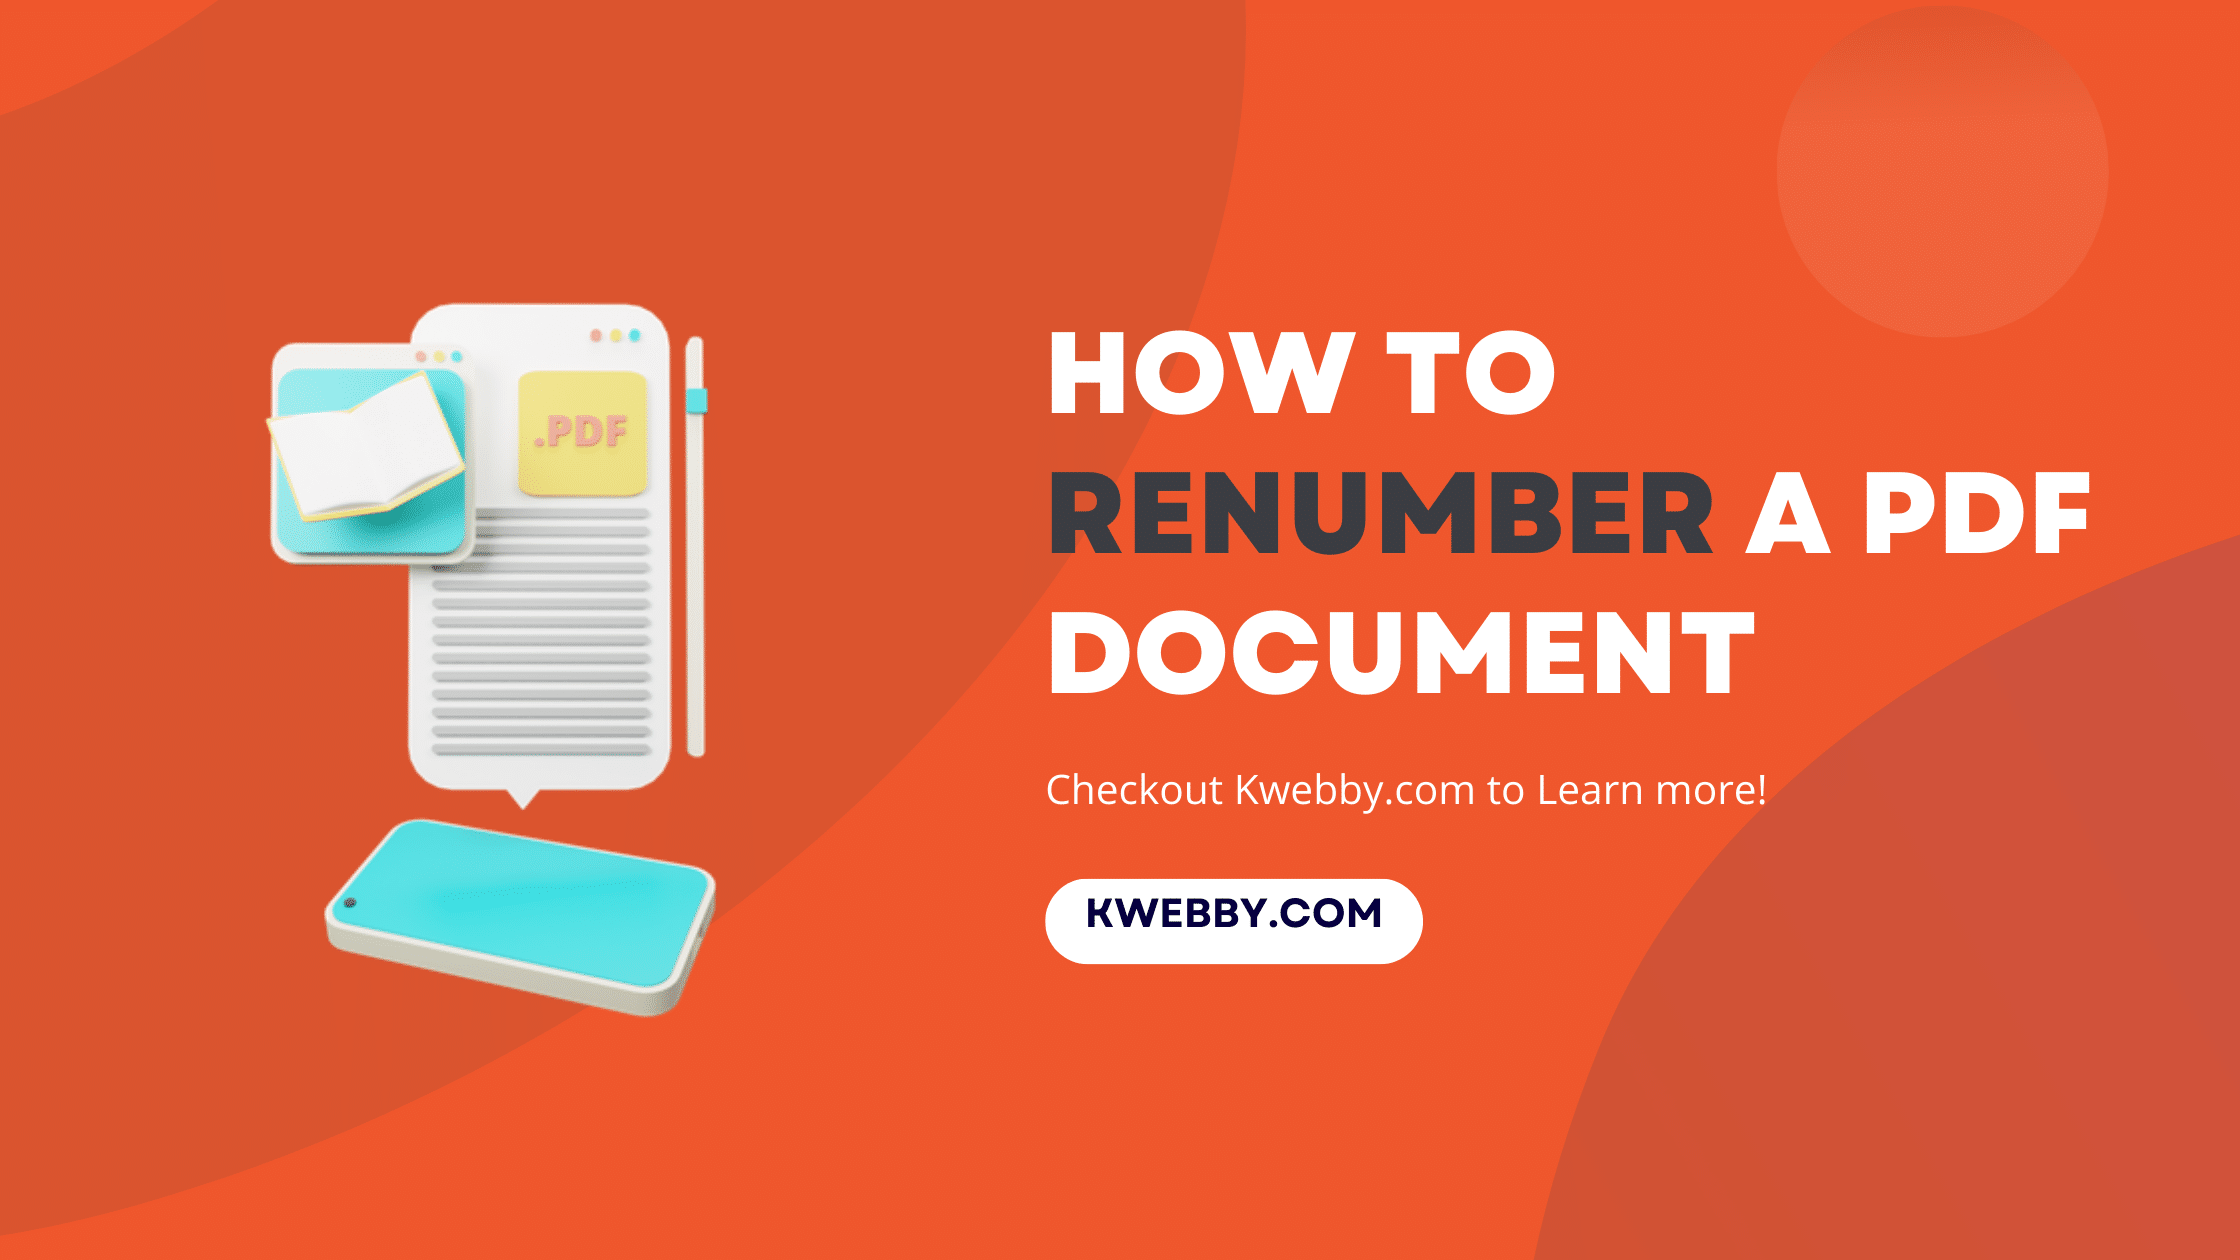 How to Renumber a PDF Document